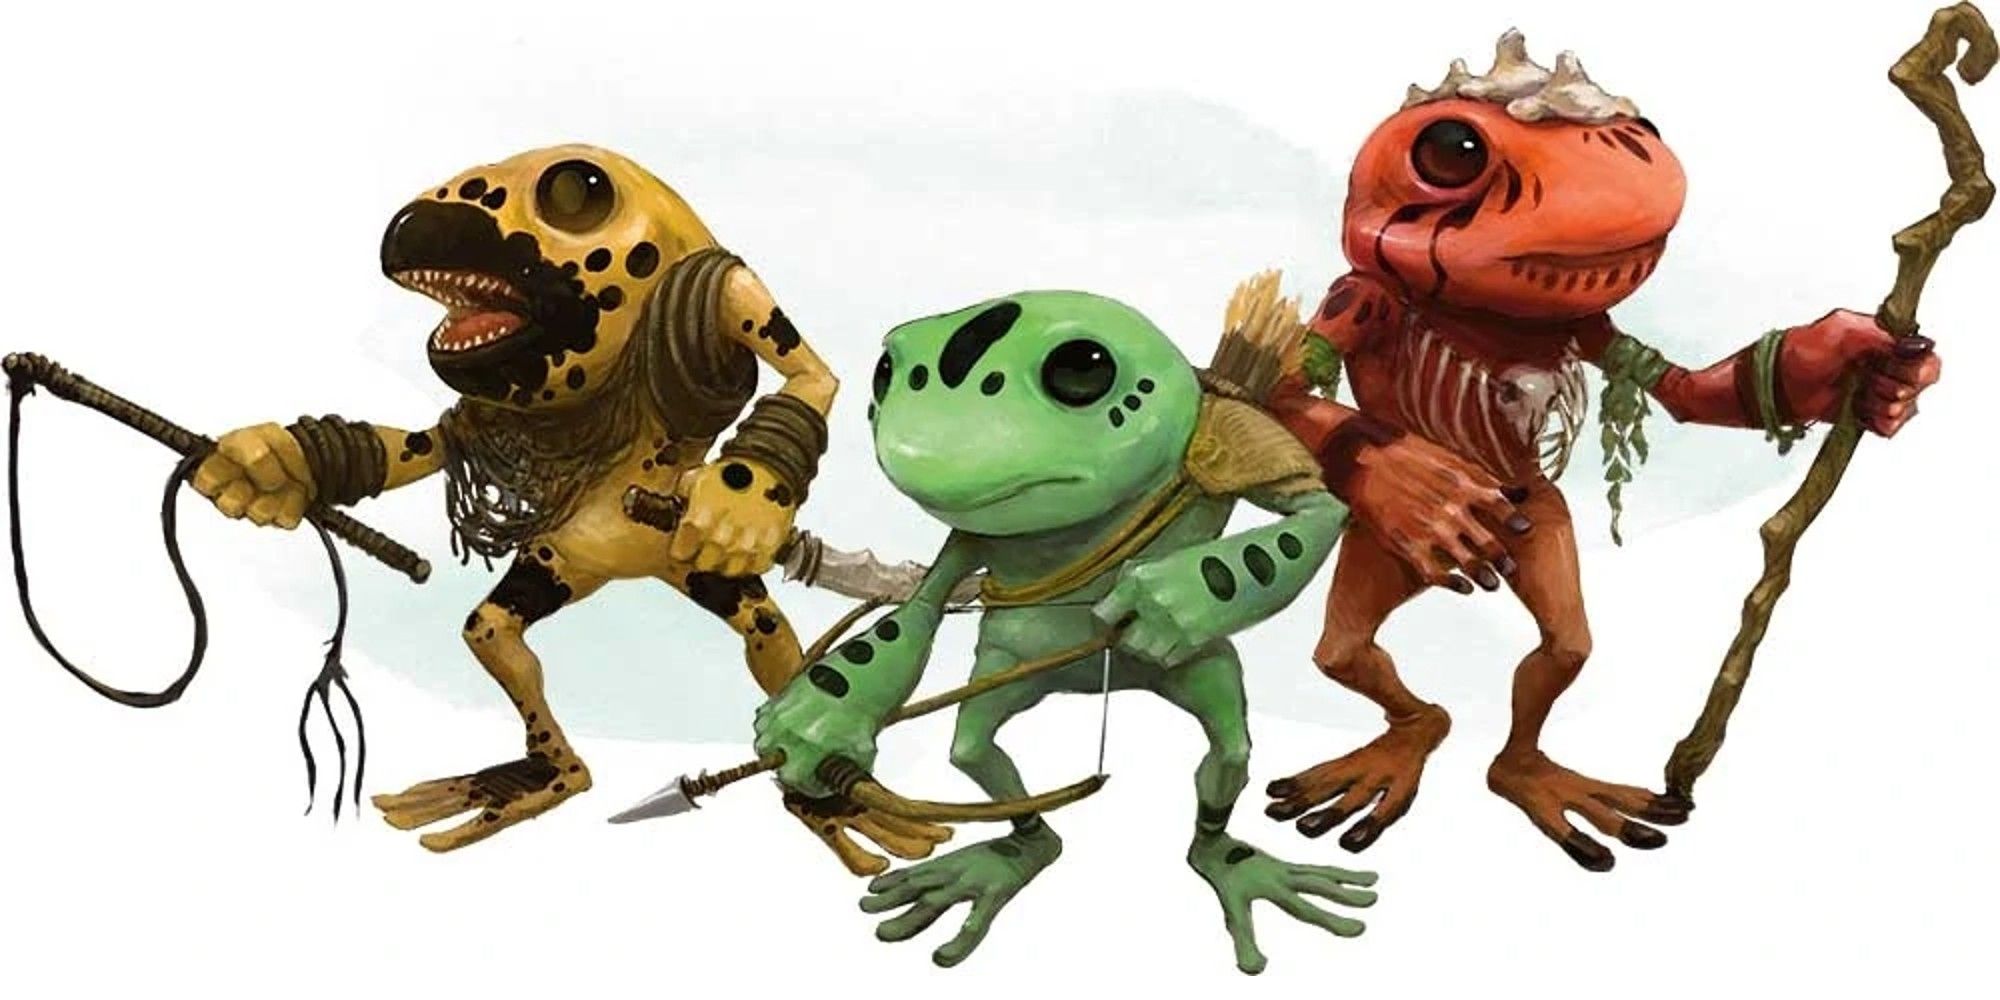 Grung from Dungeons & Dragons, including yellow, green and red variants with different tools, official WotC art 